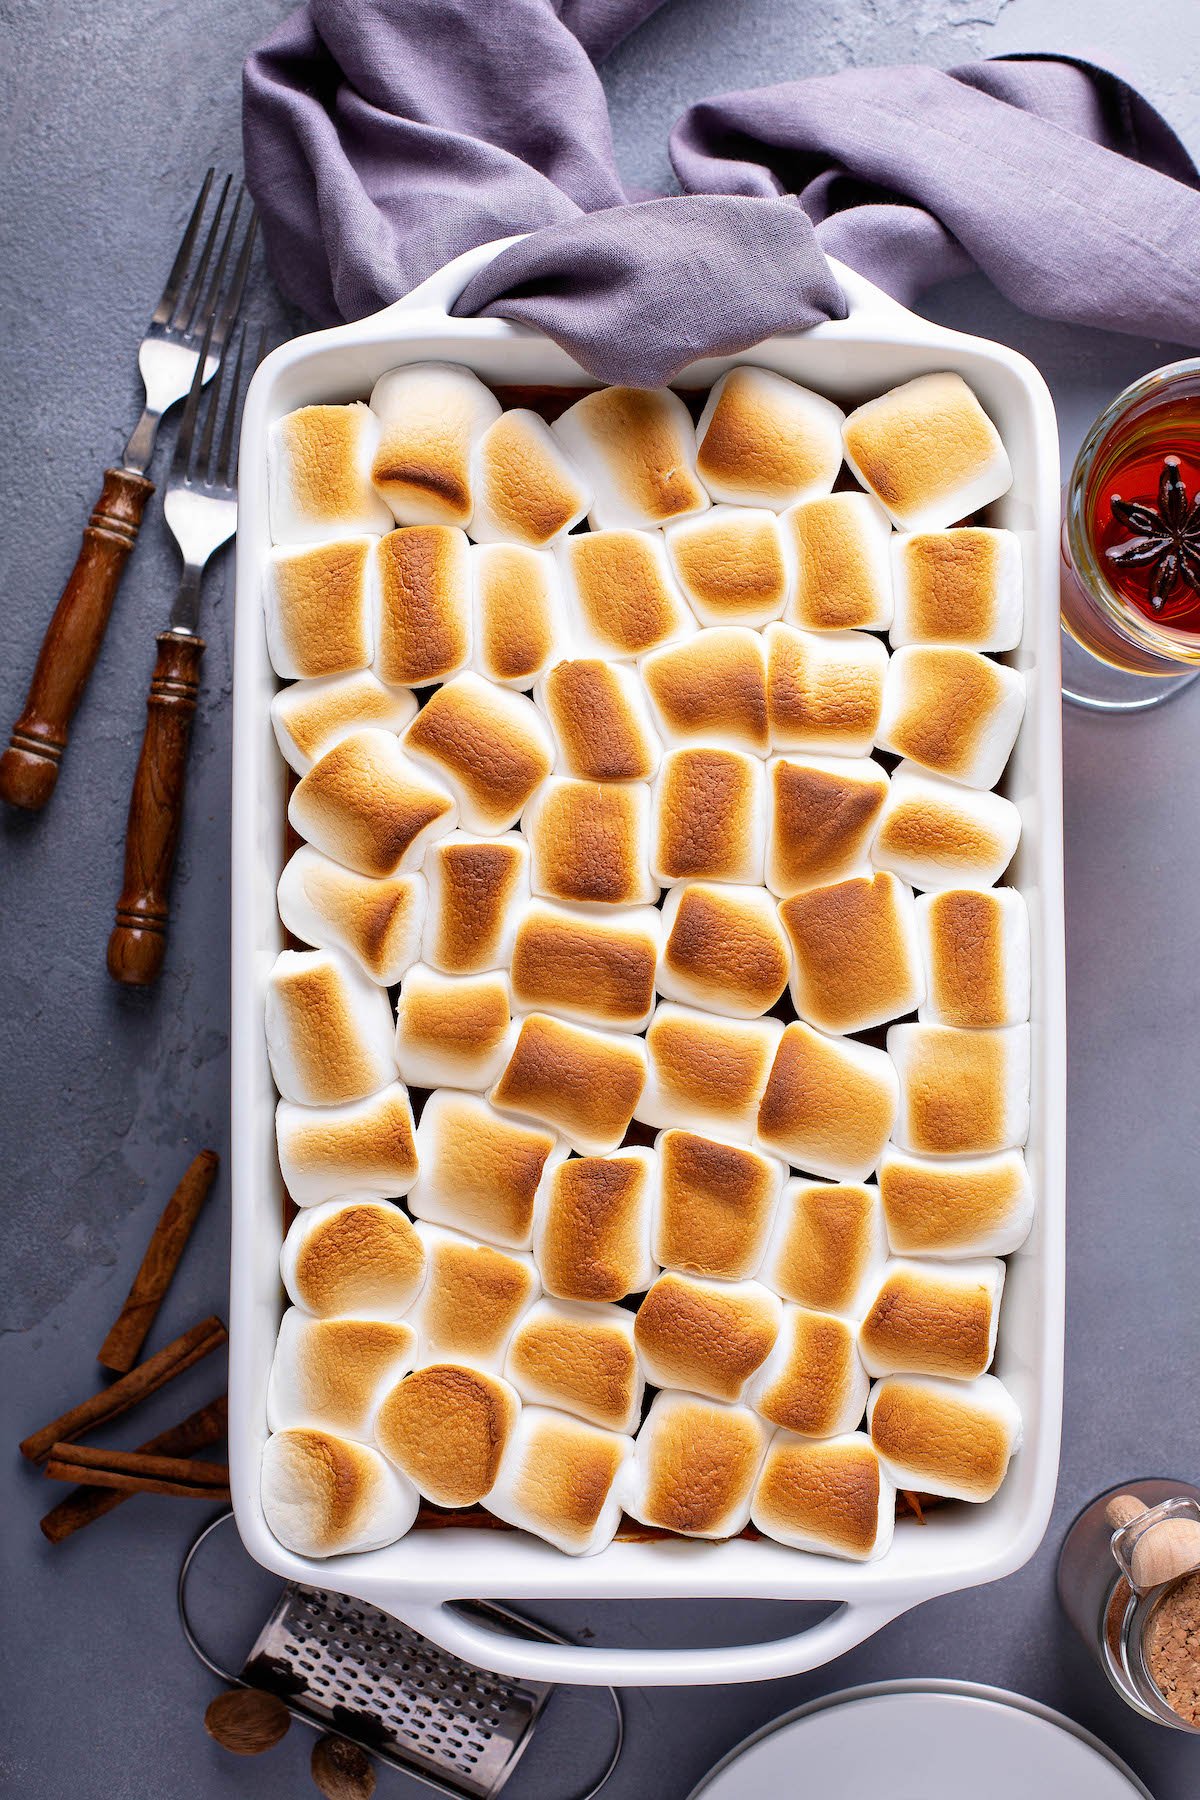 Toasted marshmallows layered on top of sweet potato casserole in a white casserole dish.